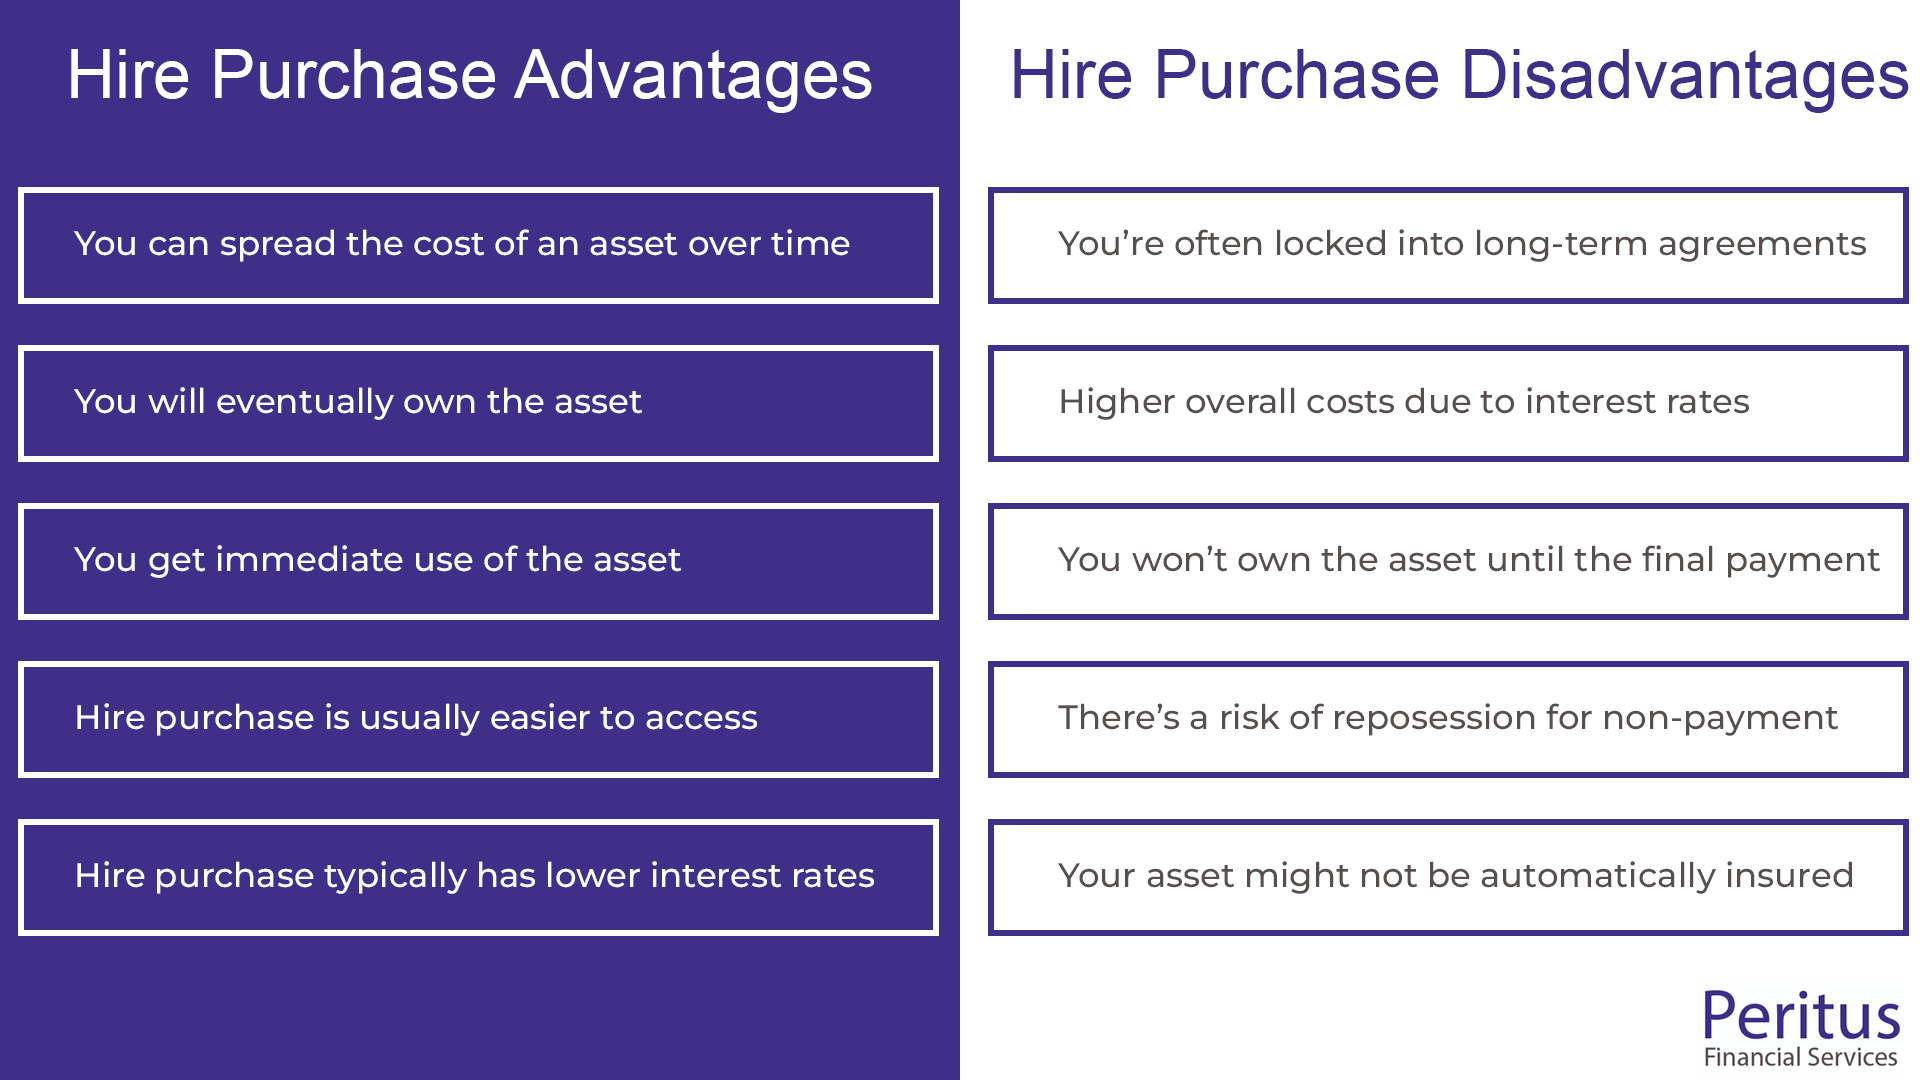 an infographic that lists the different advantages and disadvantages of hire purchase